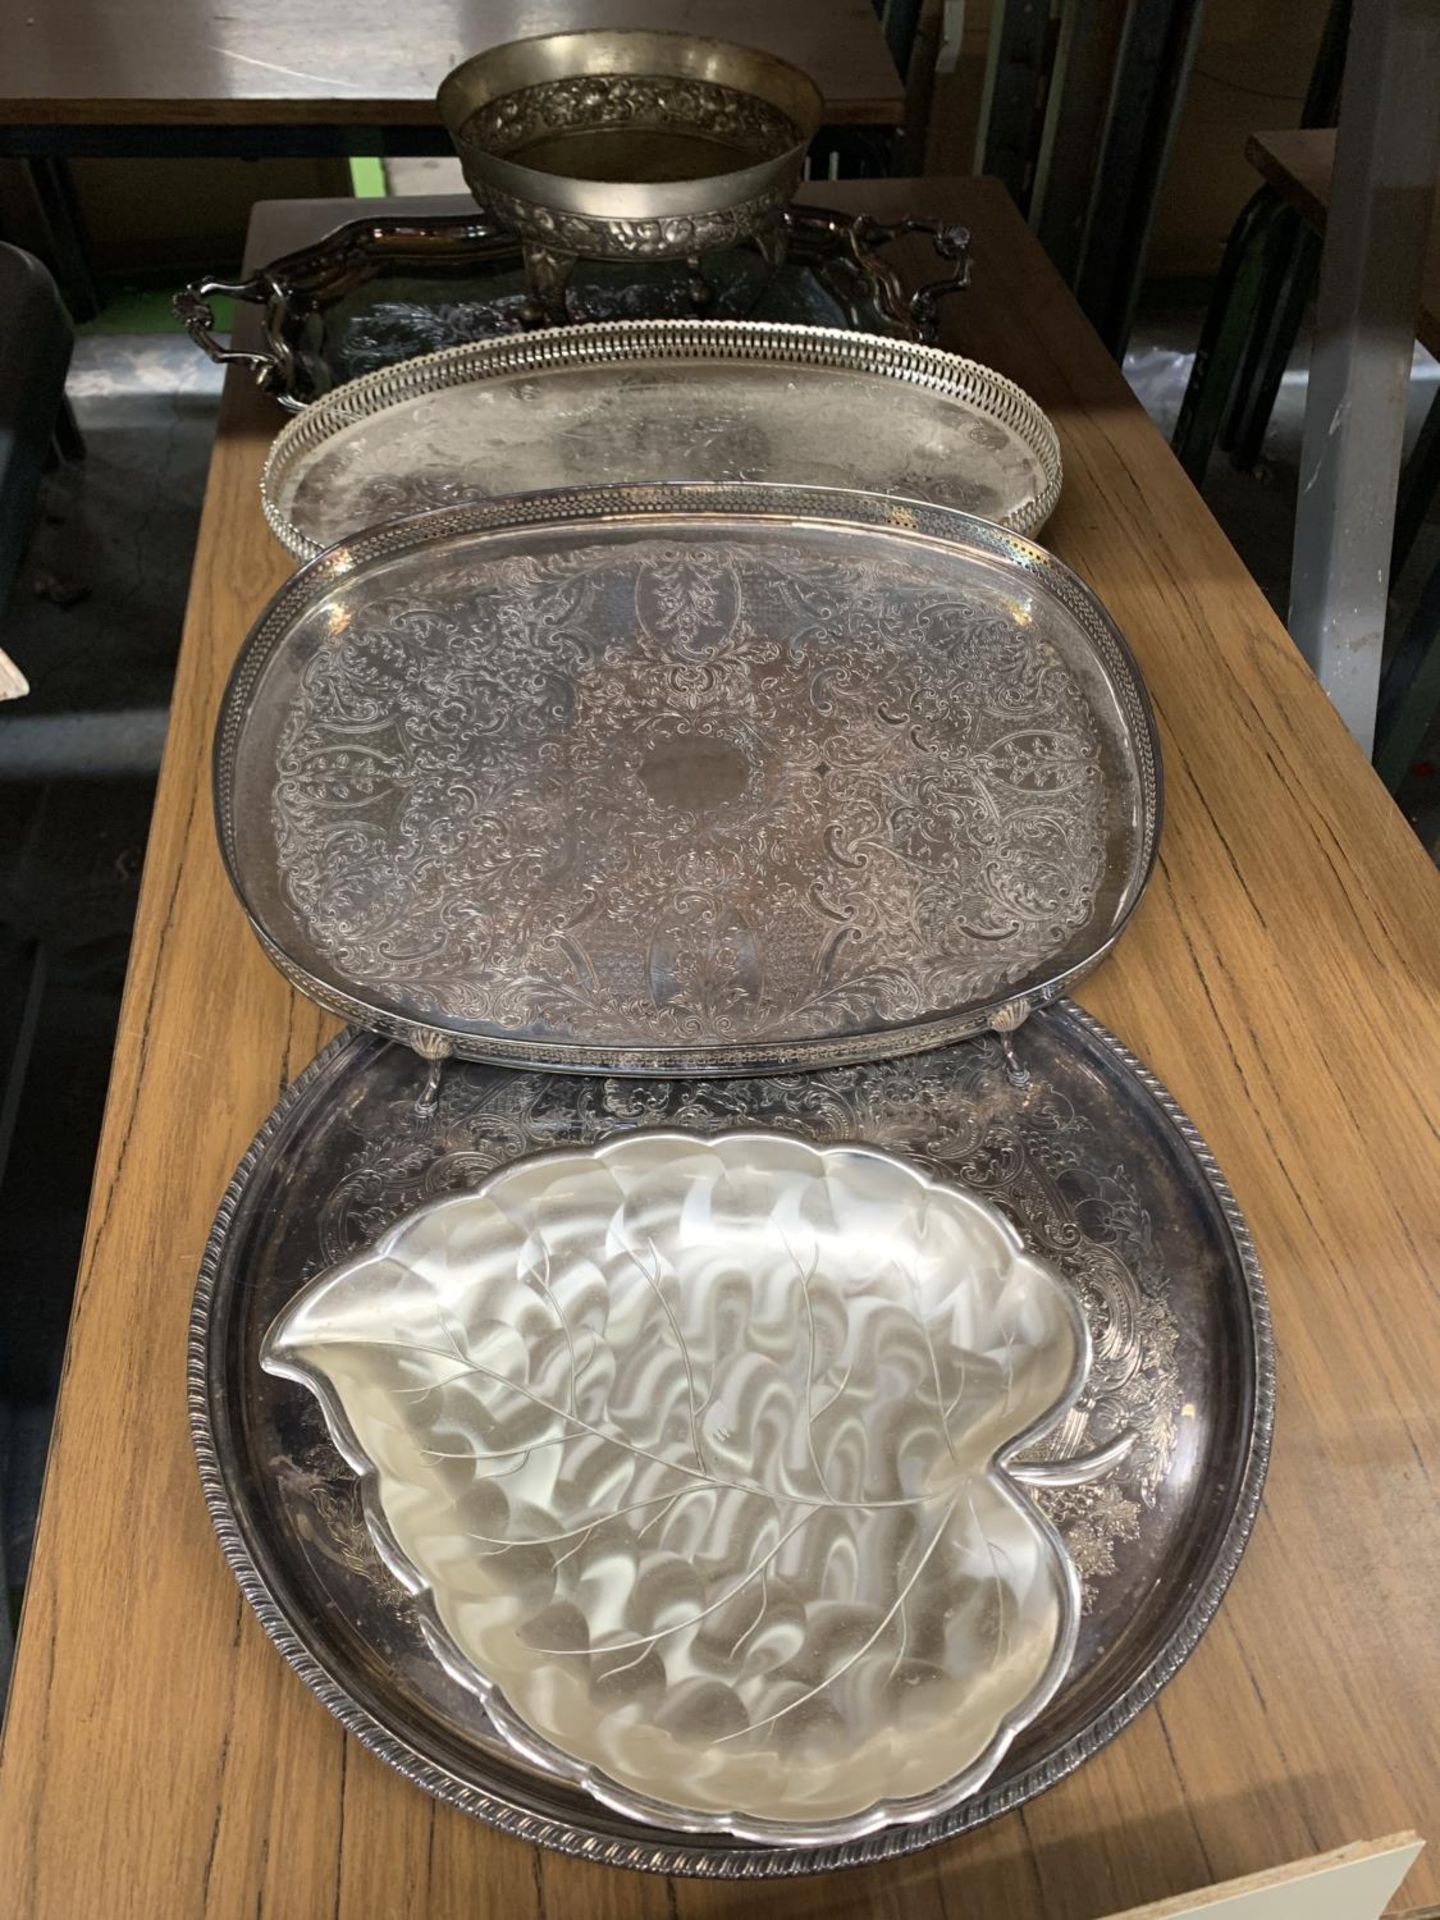 FOUR SILVER PLATED TRAYS, 2 GALLERIED PLUS TWO FOOTED BOWLS